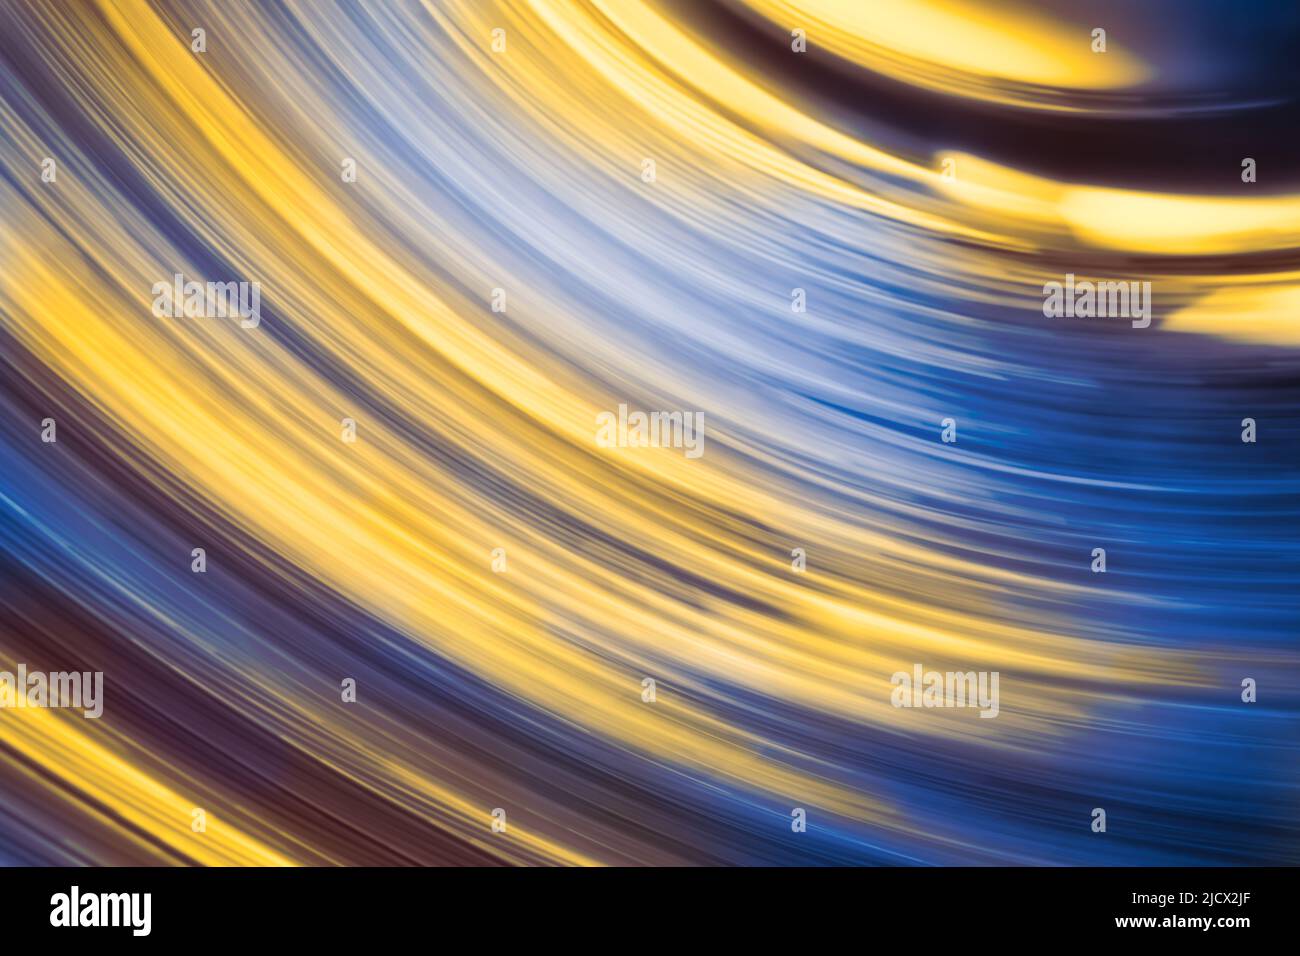 Abstract blue and yellow light trails Stock Photo